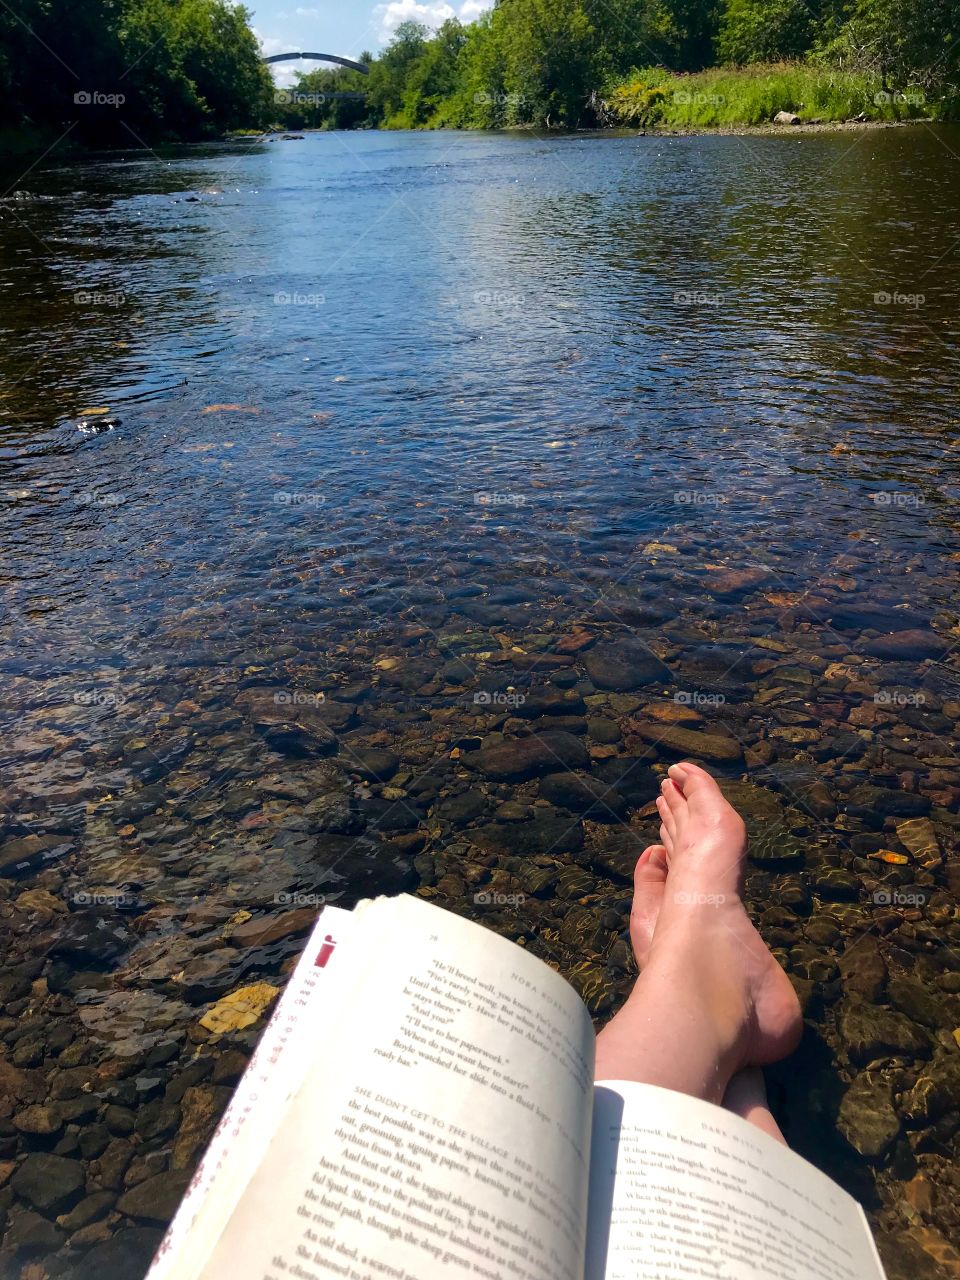 Sitting on a rock in the middle of the river on a sunny day reading❤️